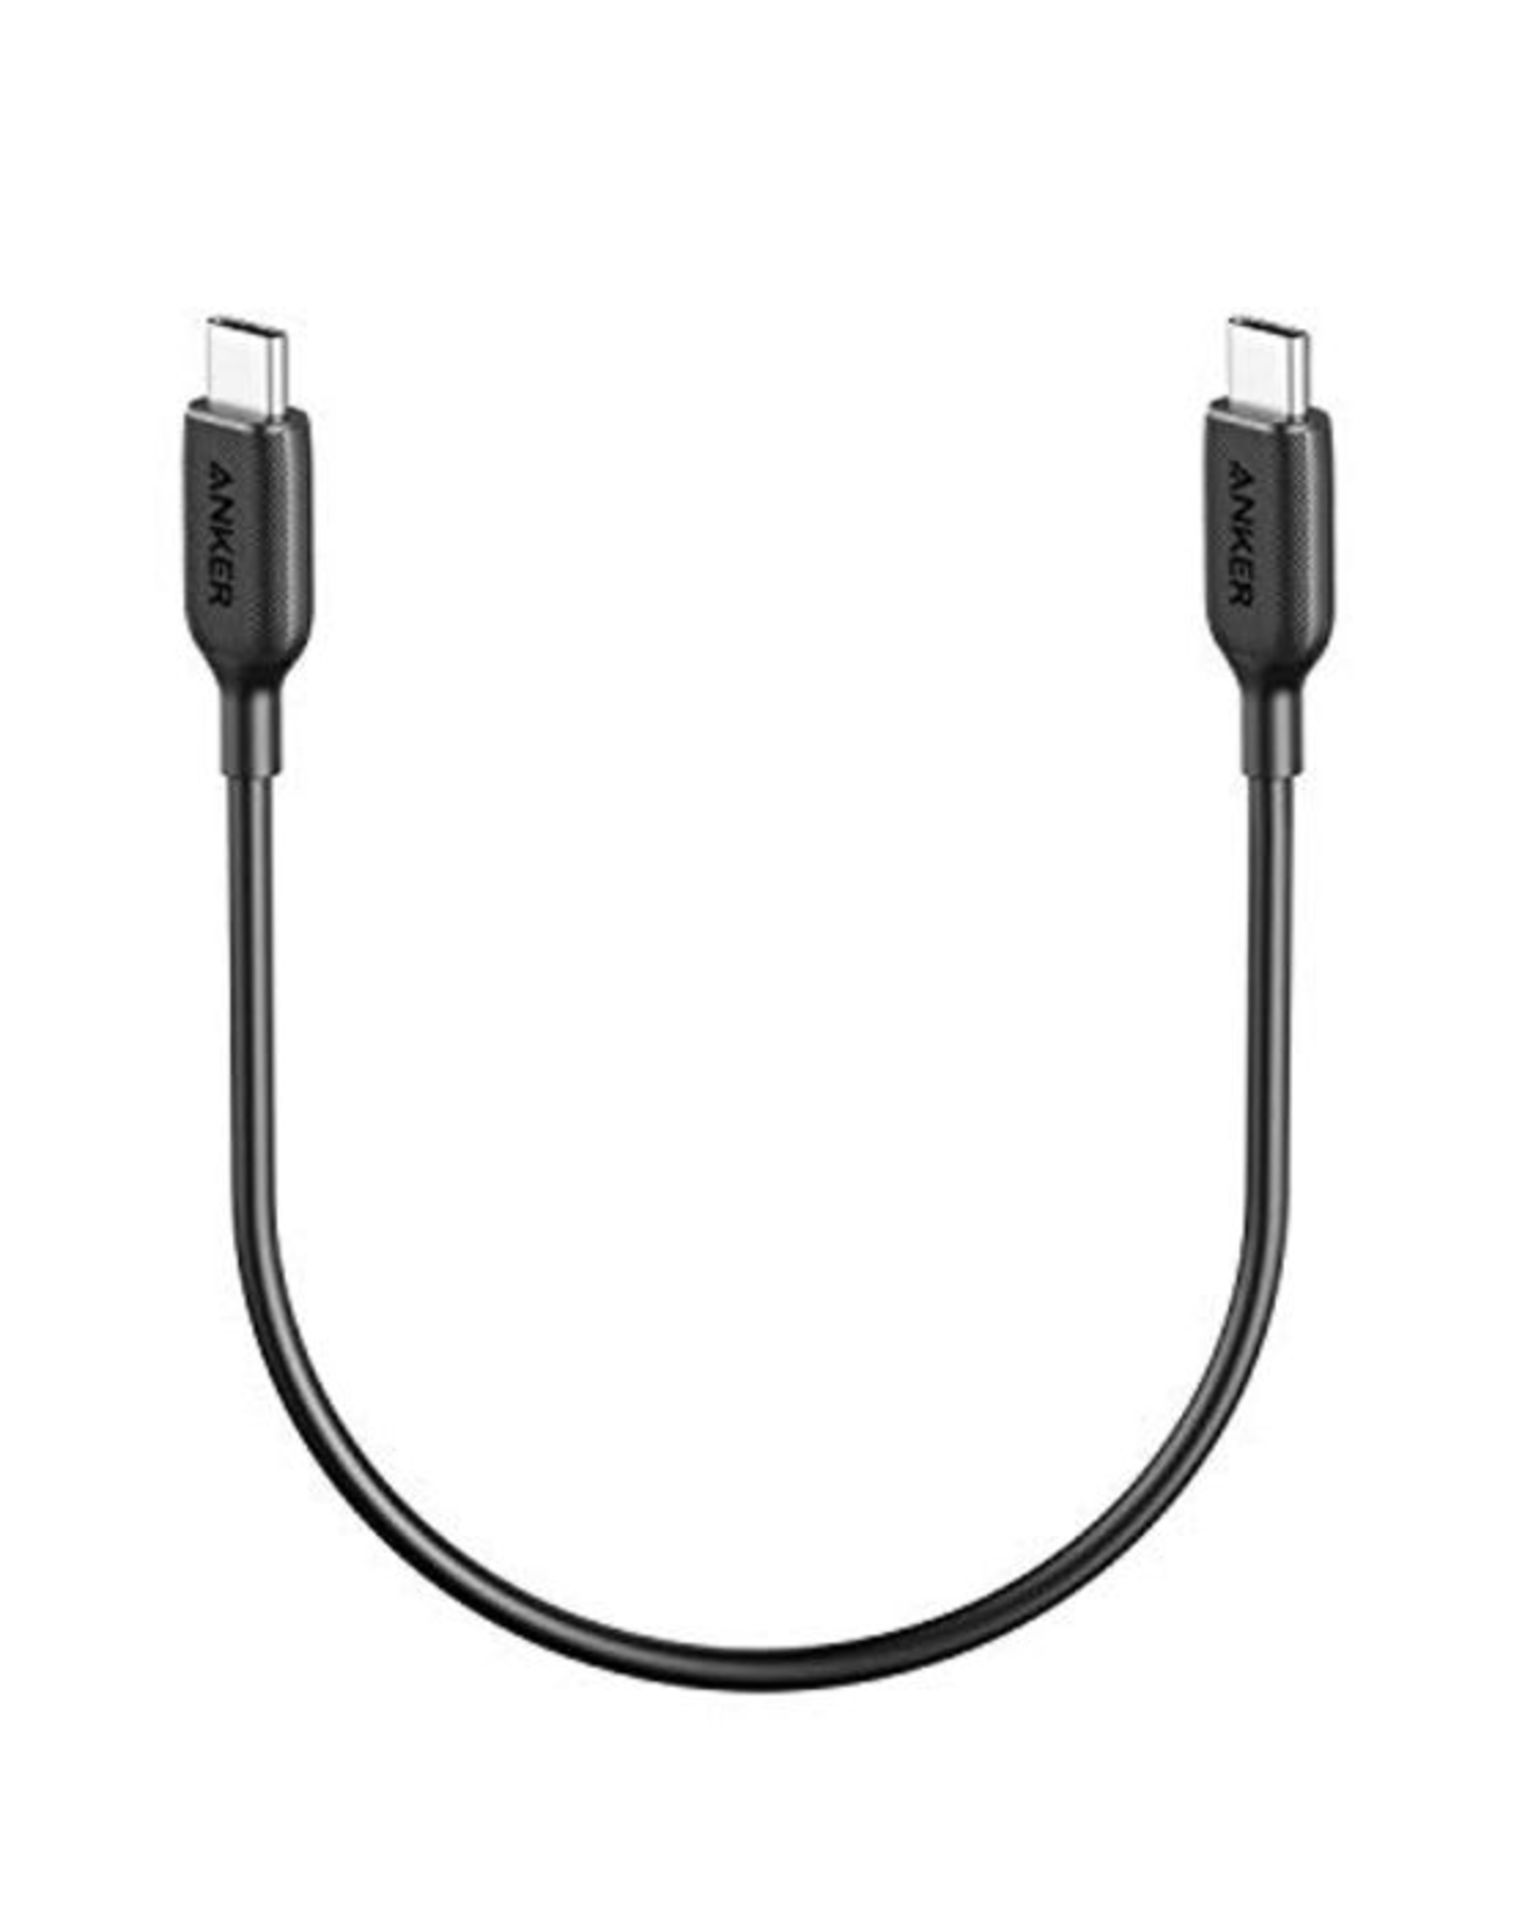 USB C to USB C Cable, Anker Powerline III USB-C to USB-C Fast Charging Cord (6 ft), 60